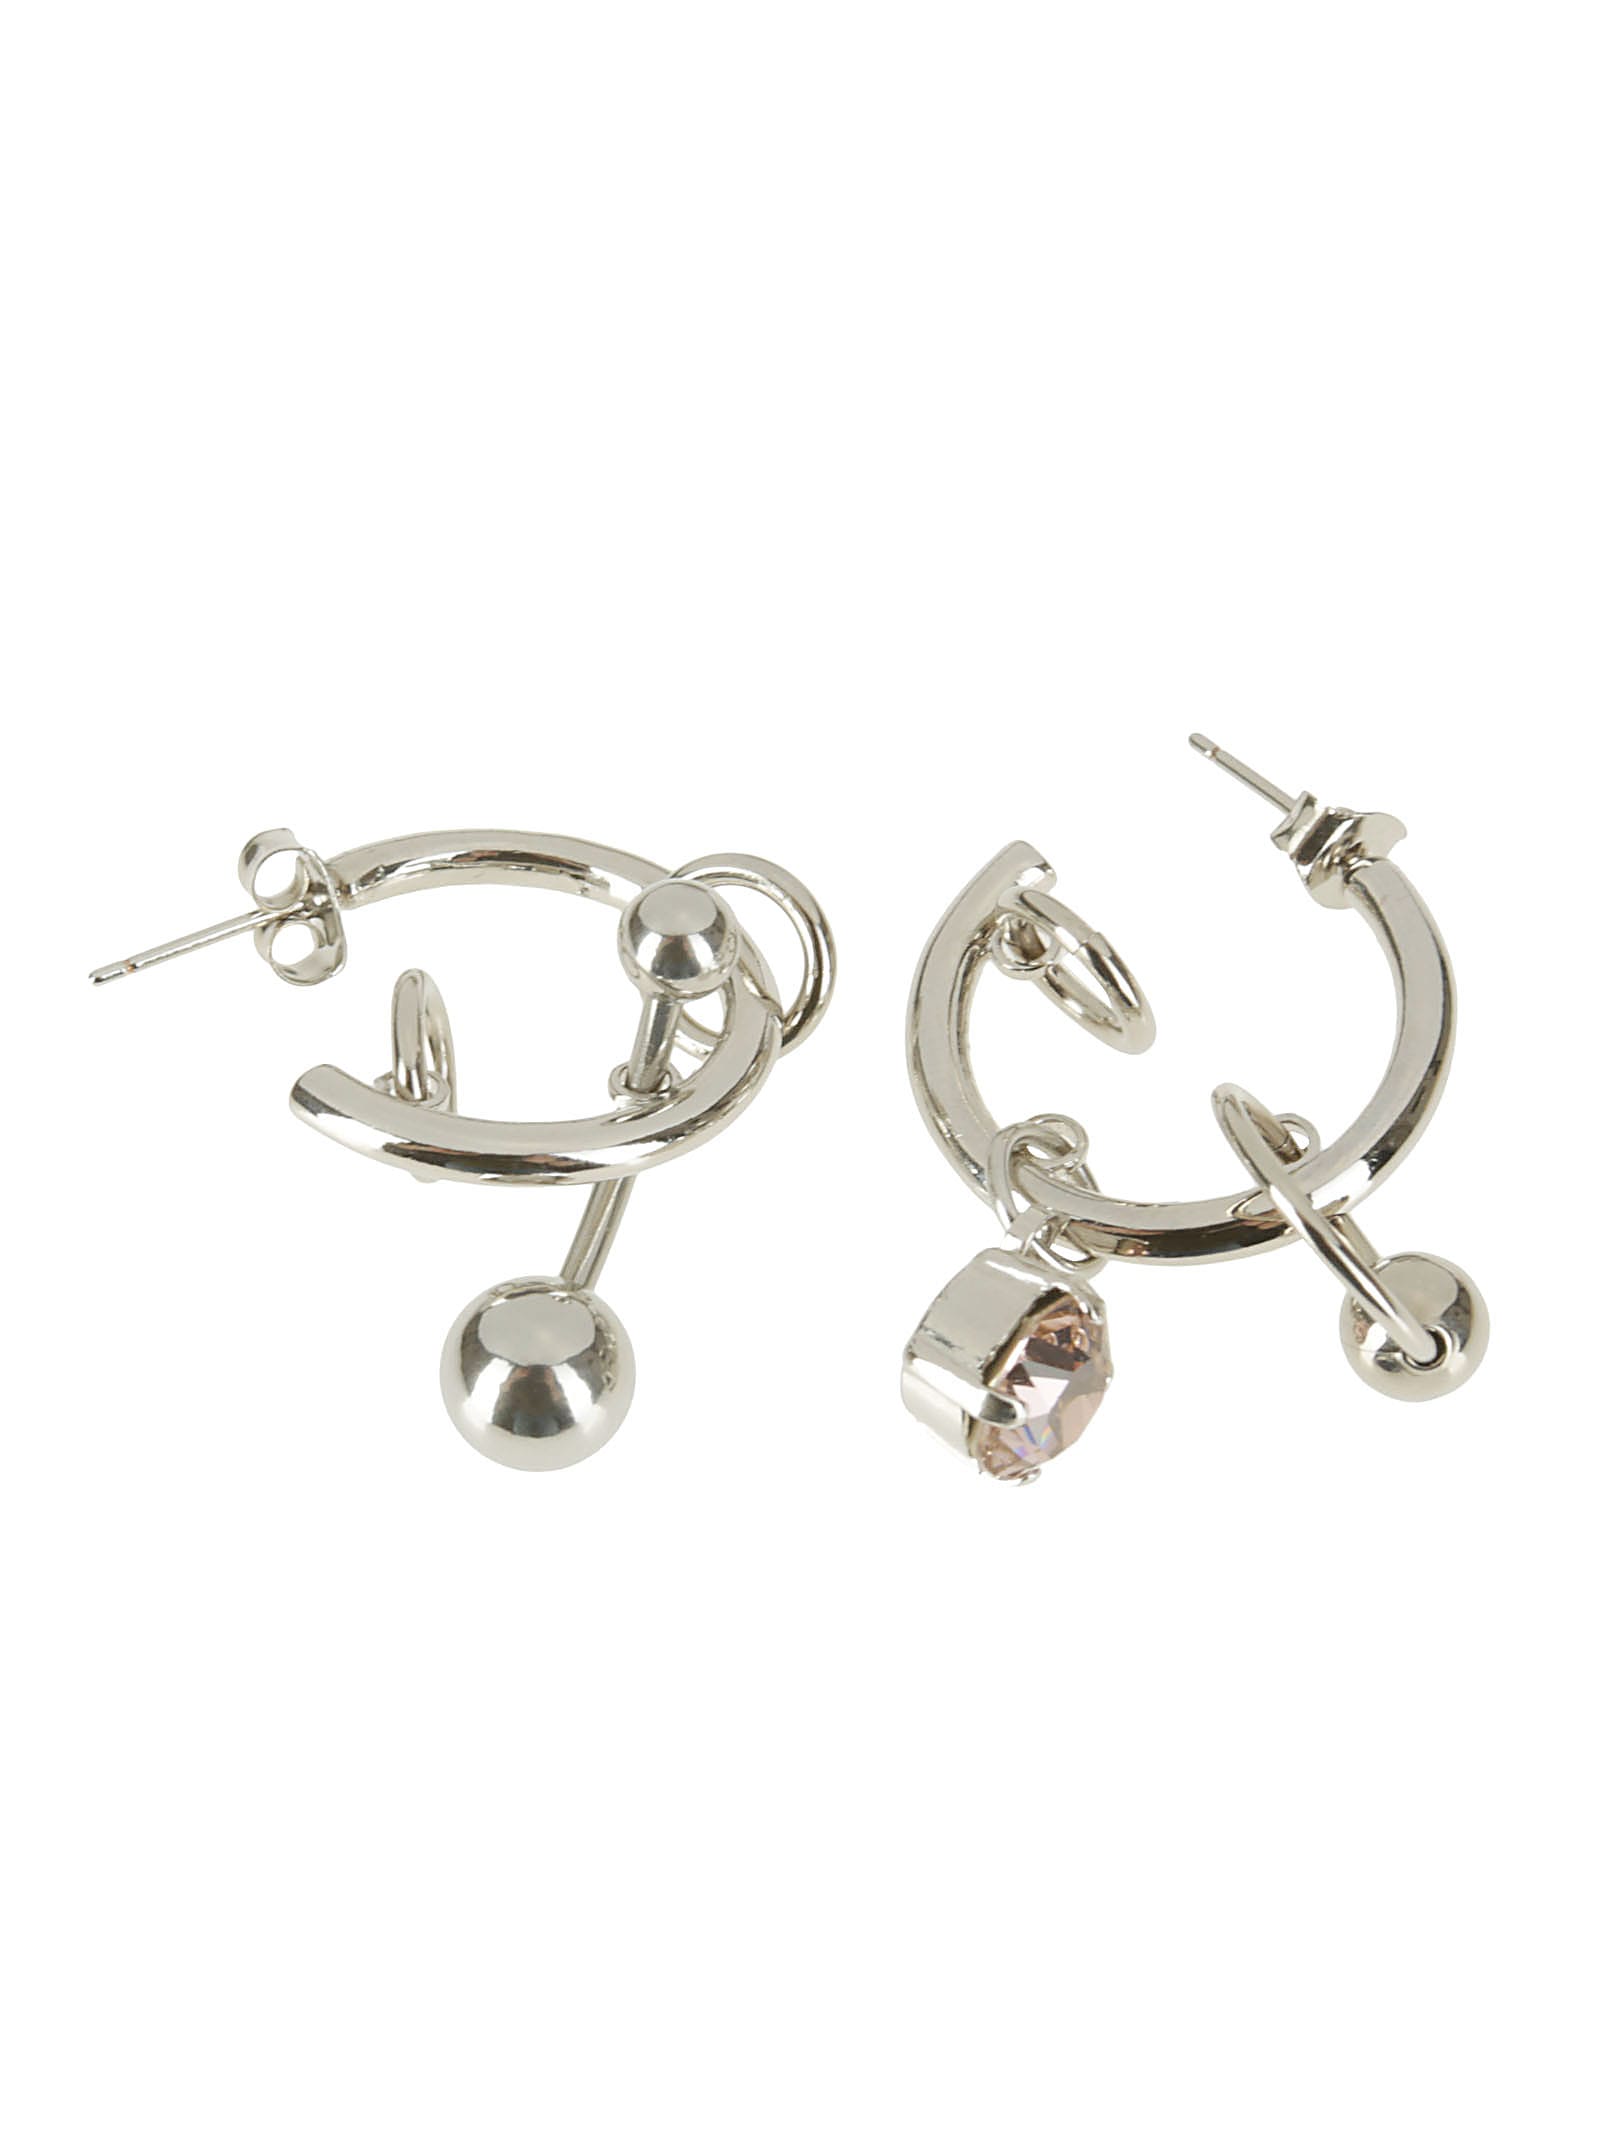 Justine Clenquet Sally Earrings In Palladium